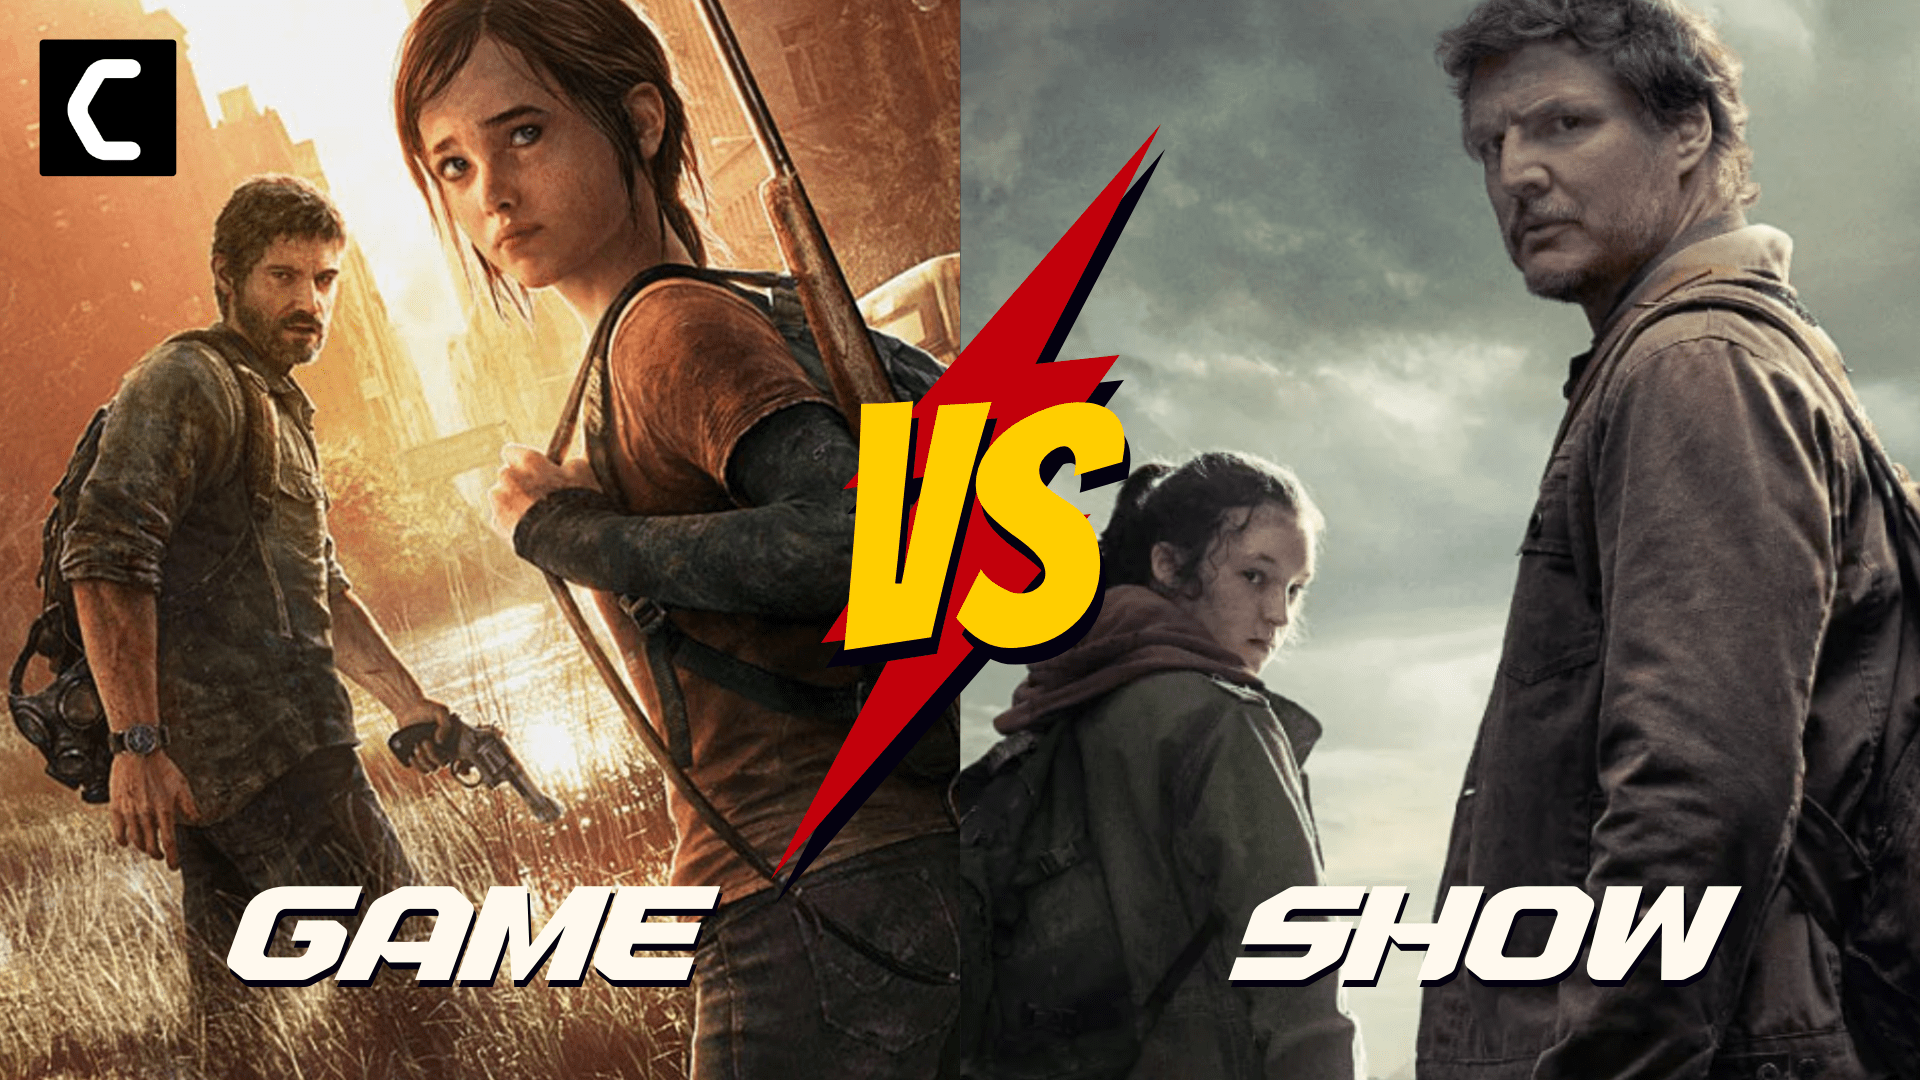 The Last of Us Game VS Show